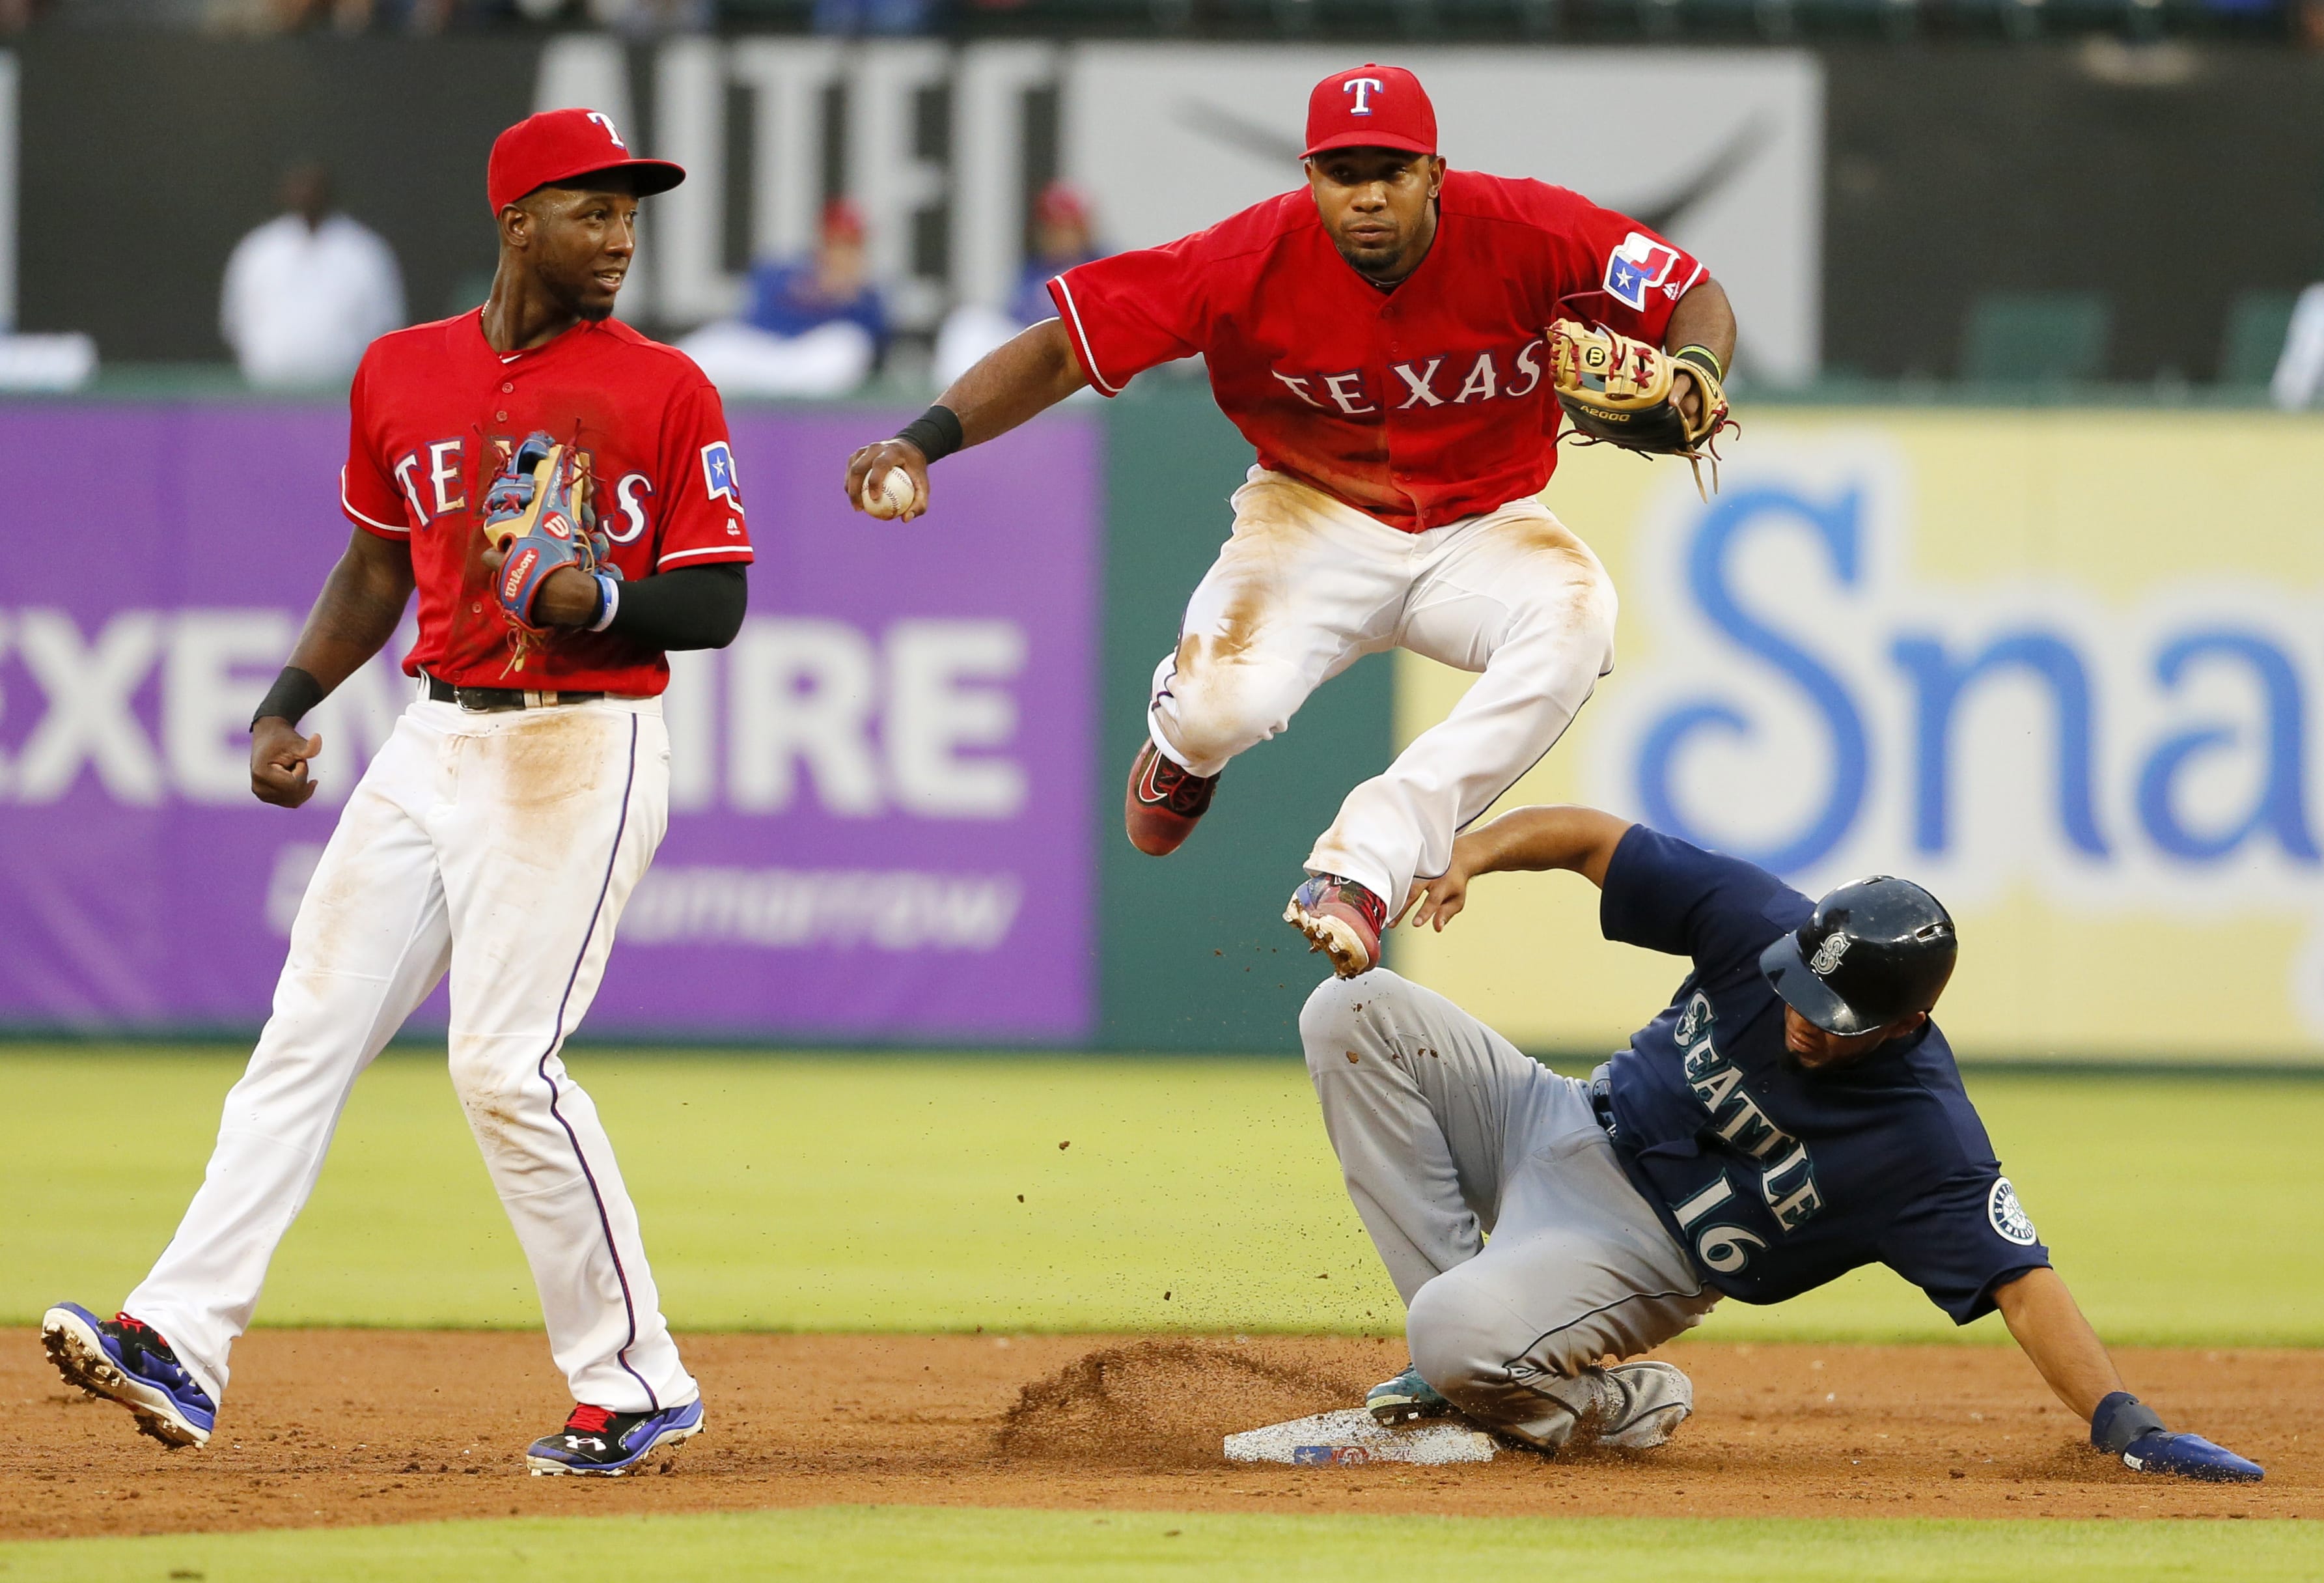 No comeback in Texas as Rangers top Mariners 7-3 - The Columbian